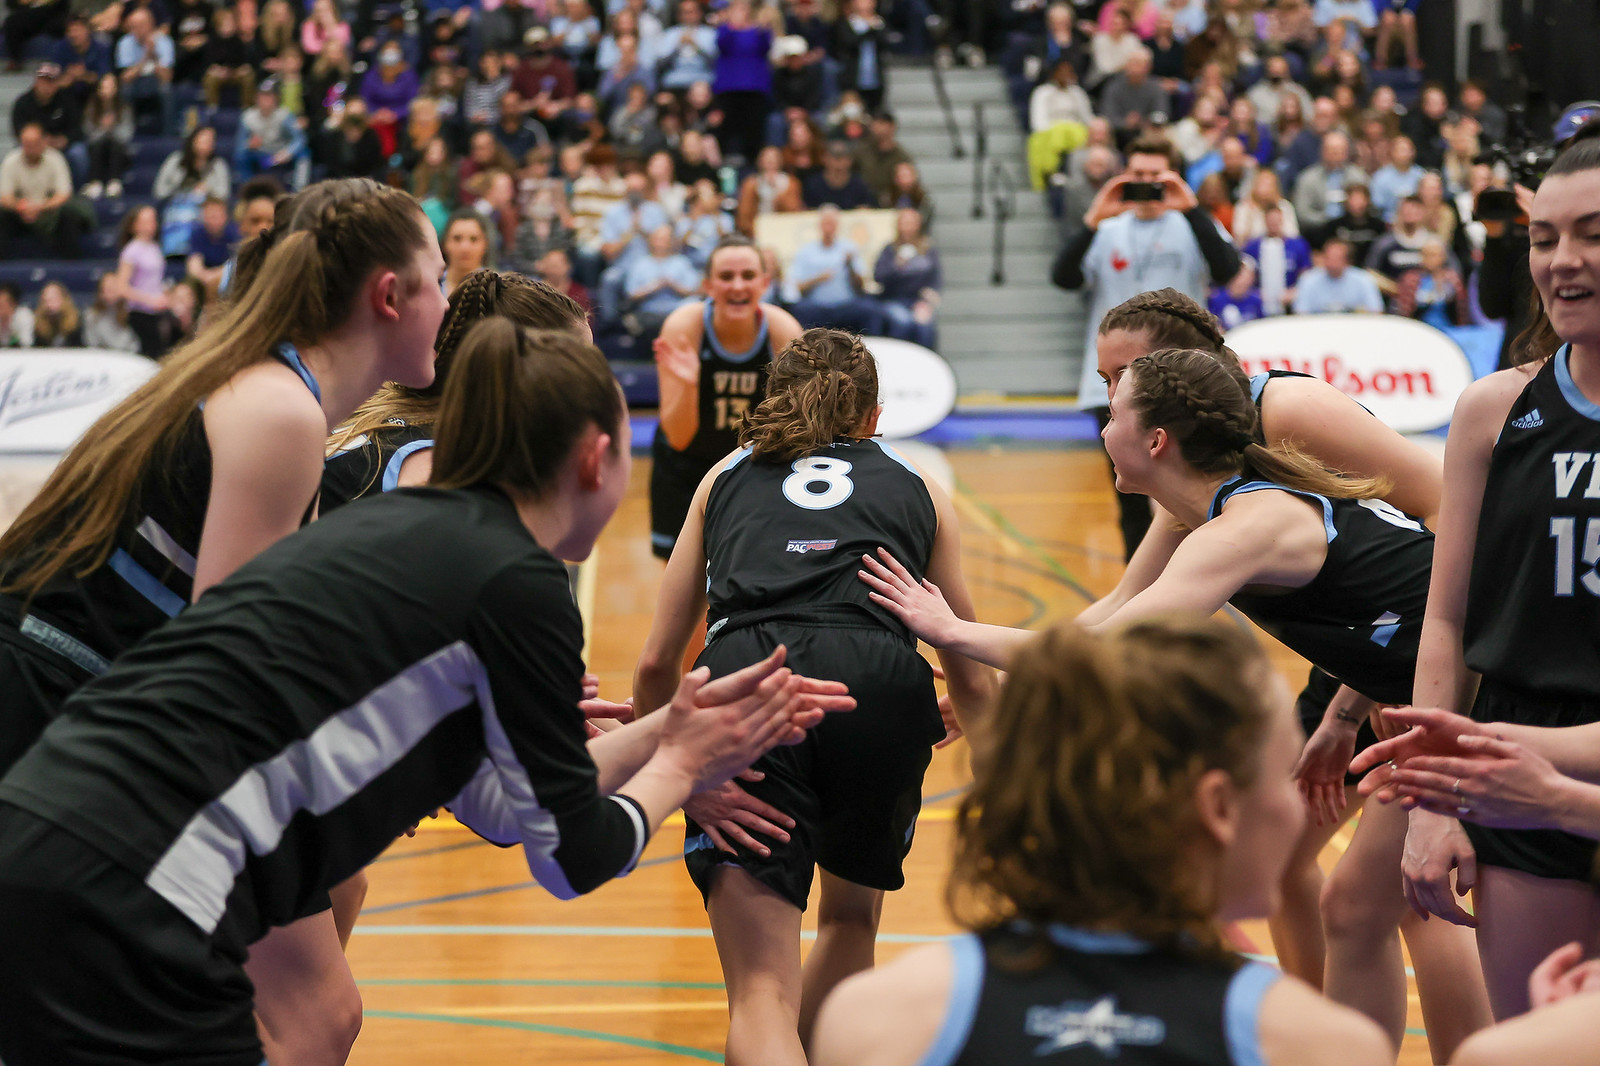 A basketball player in a black uniform runs onto a court to high five a teammate while surrounded by other players applauding her.